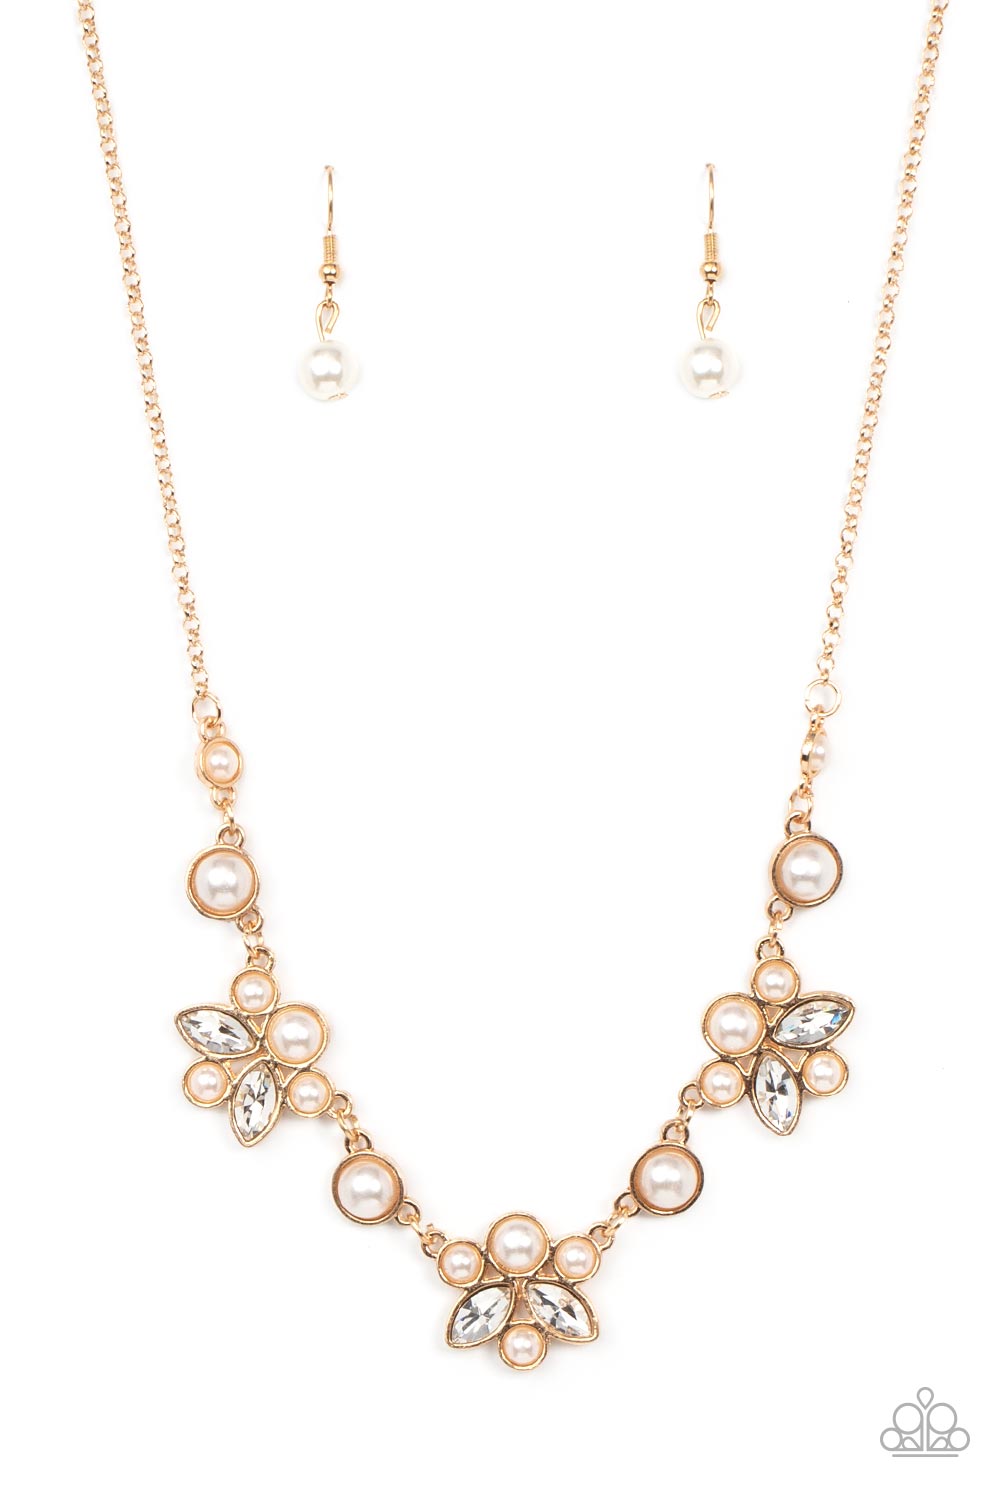 Paparazzi Necklace - Royally Ever After - Gold